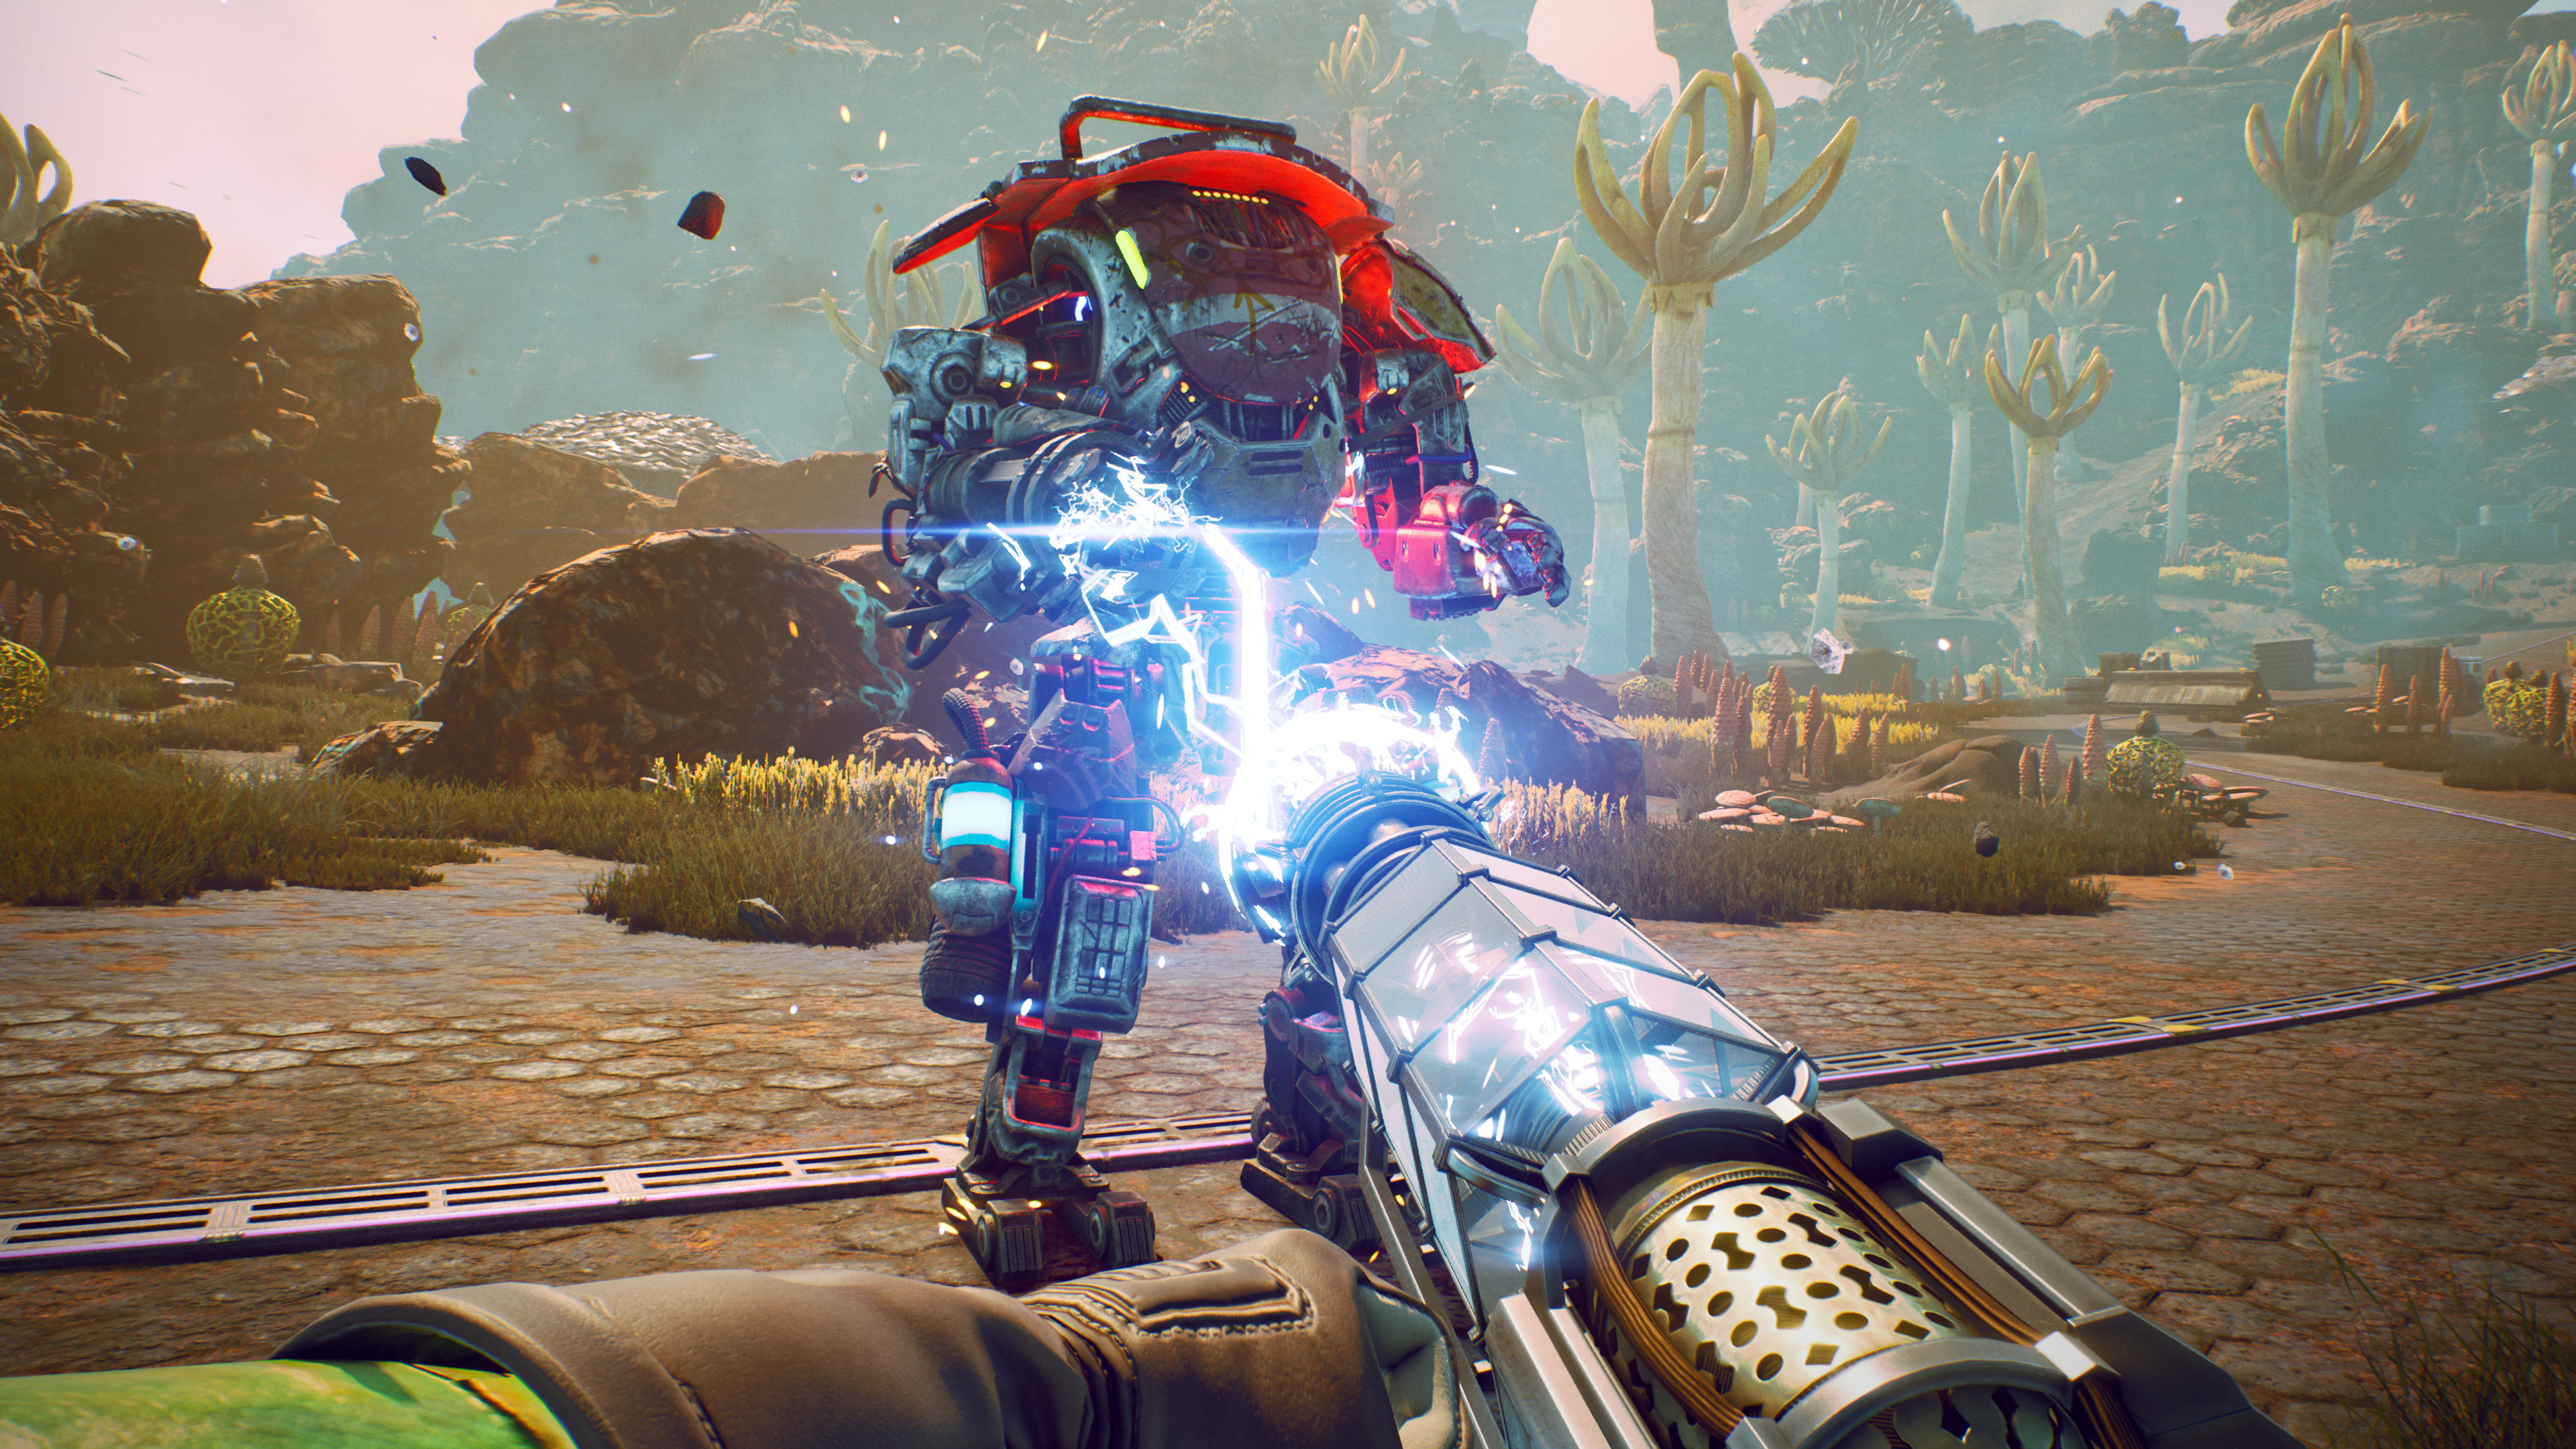 Image for The Outer Worlds hands-on preview - Fallout’s funnier cousin, now with improved V.A.T.S.